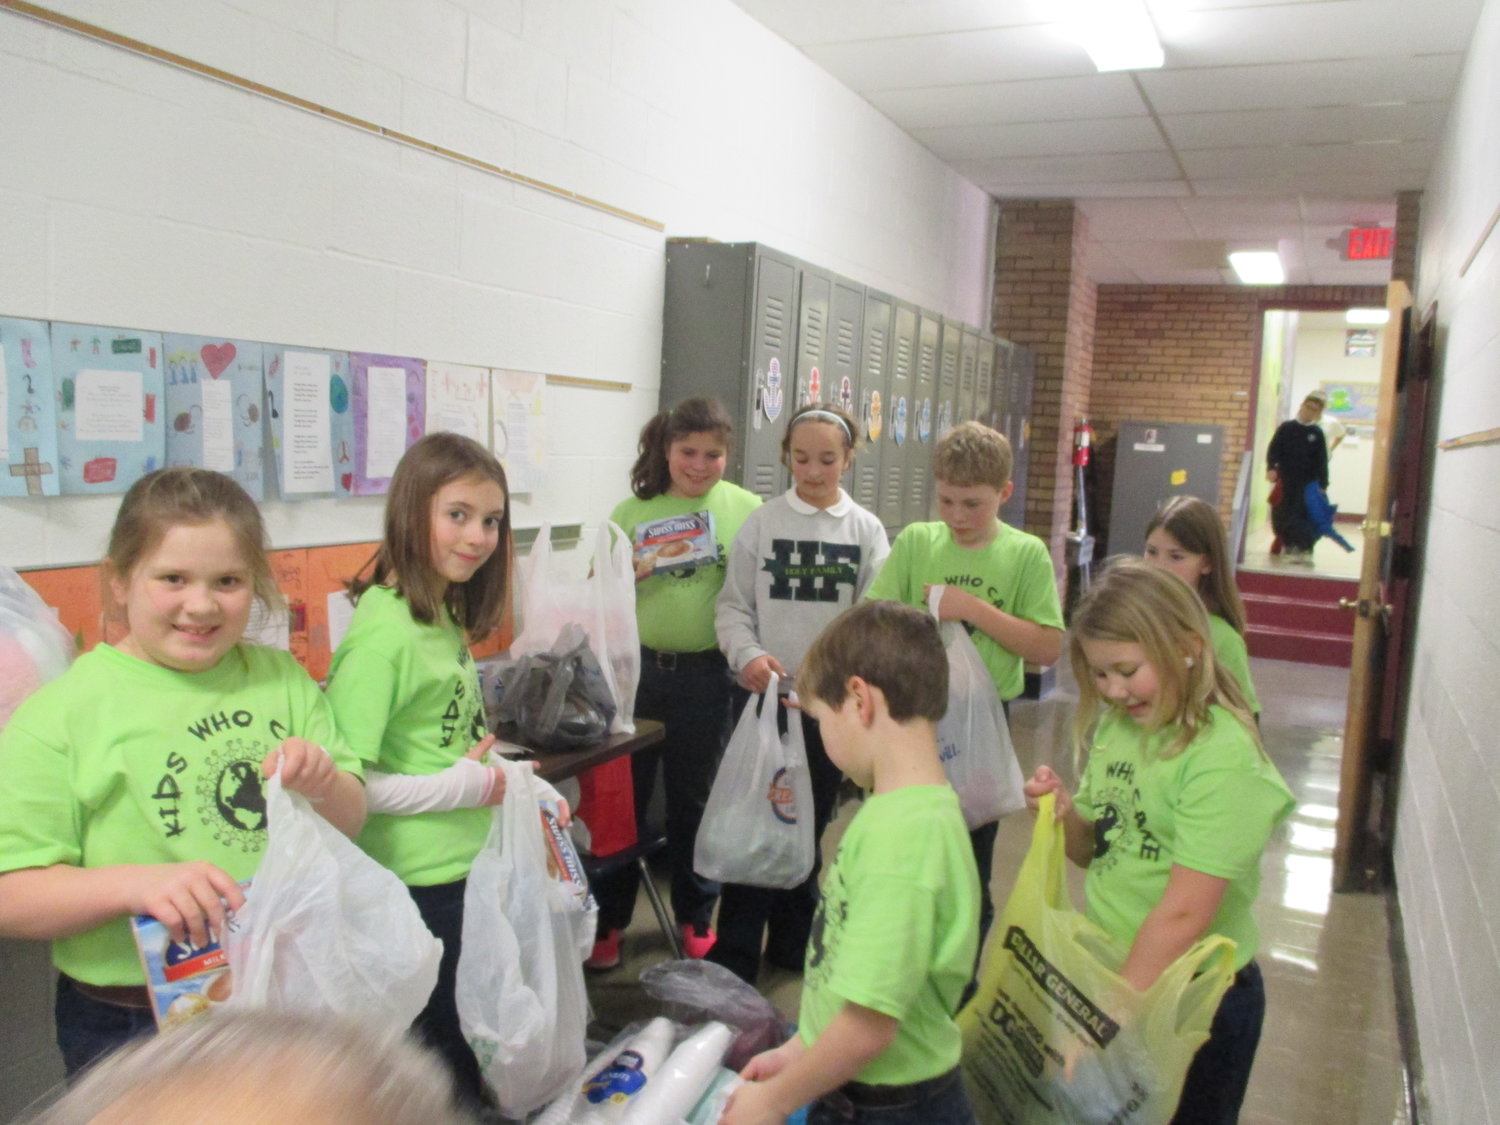 Holy Family School's Kids Who Care group organize gifts for children in need.